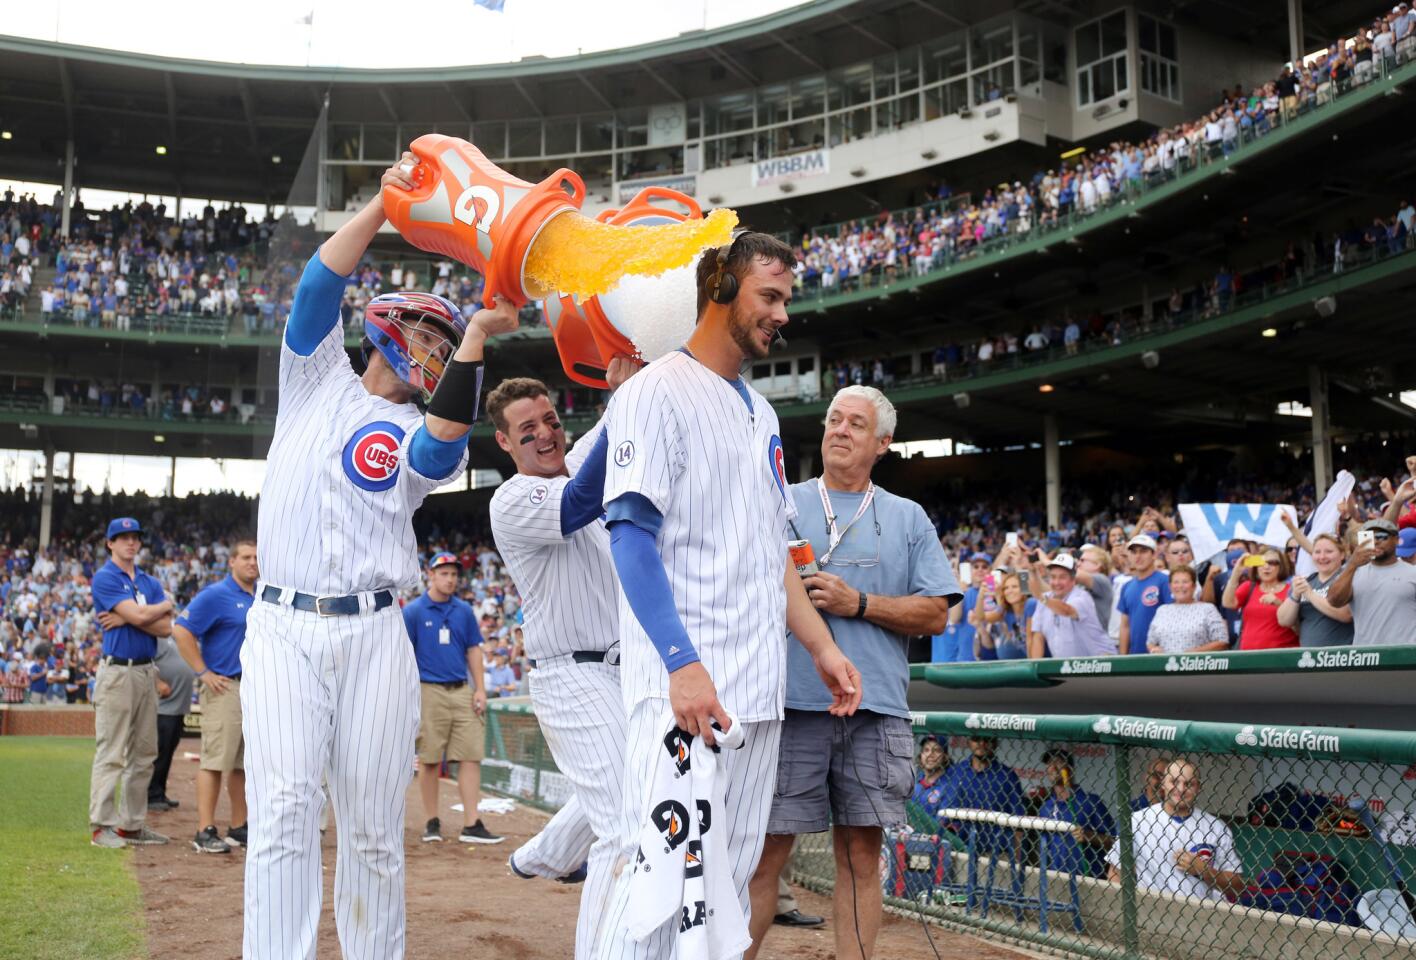 David Ross and Anthony Rizzo dunk Kris Bryant after his walk-off home run in the ninth inning.